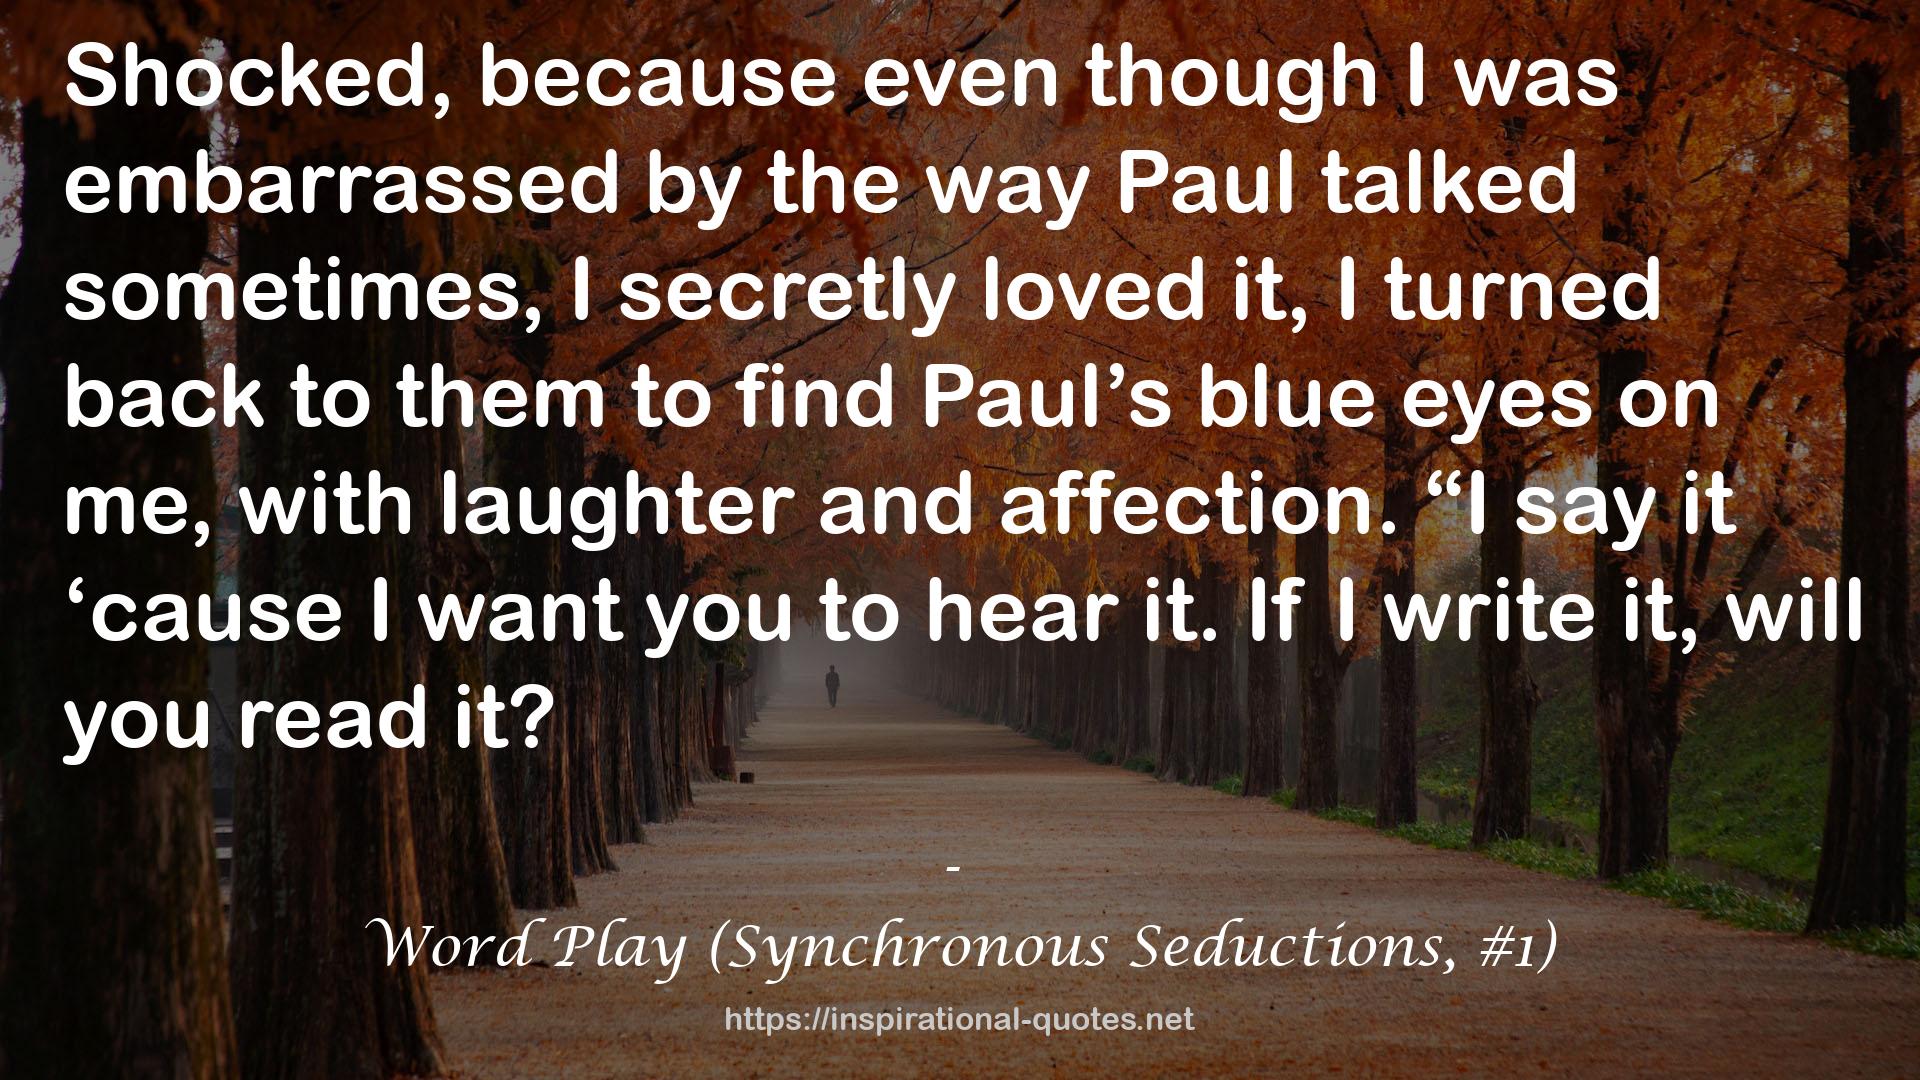 Word Play (Synchronous Seductions, #1) QUOTES